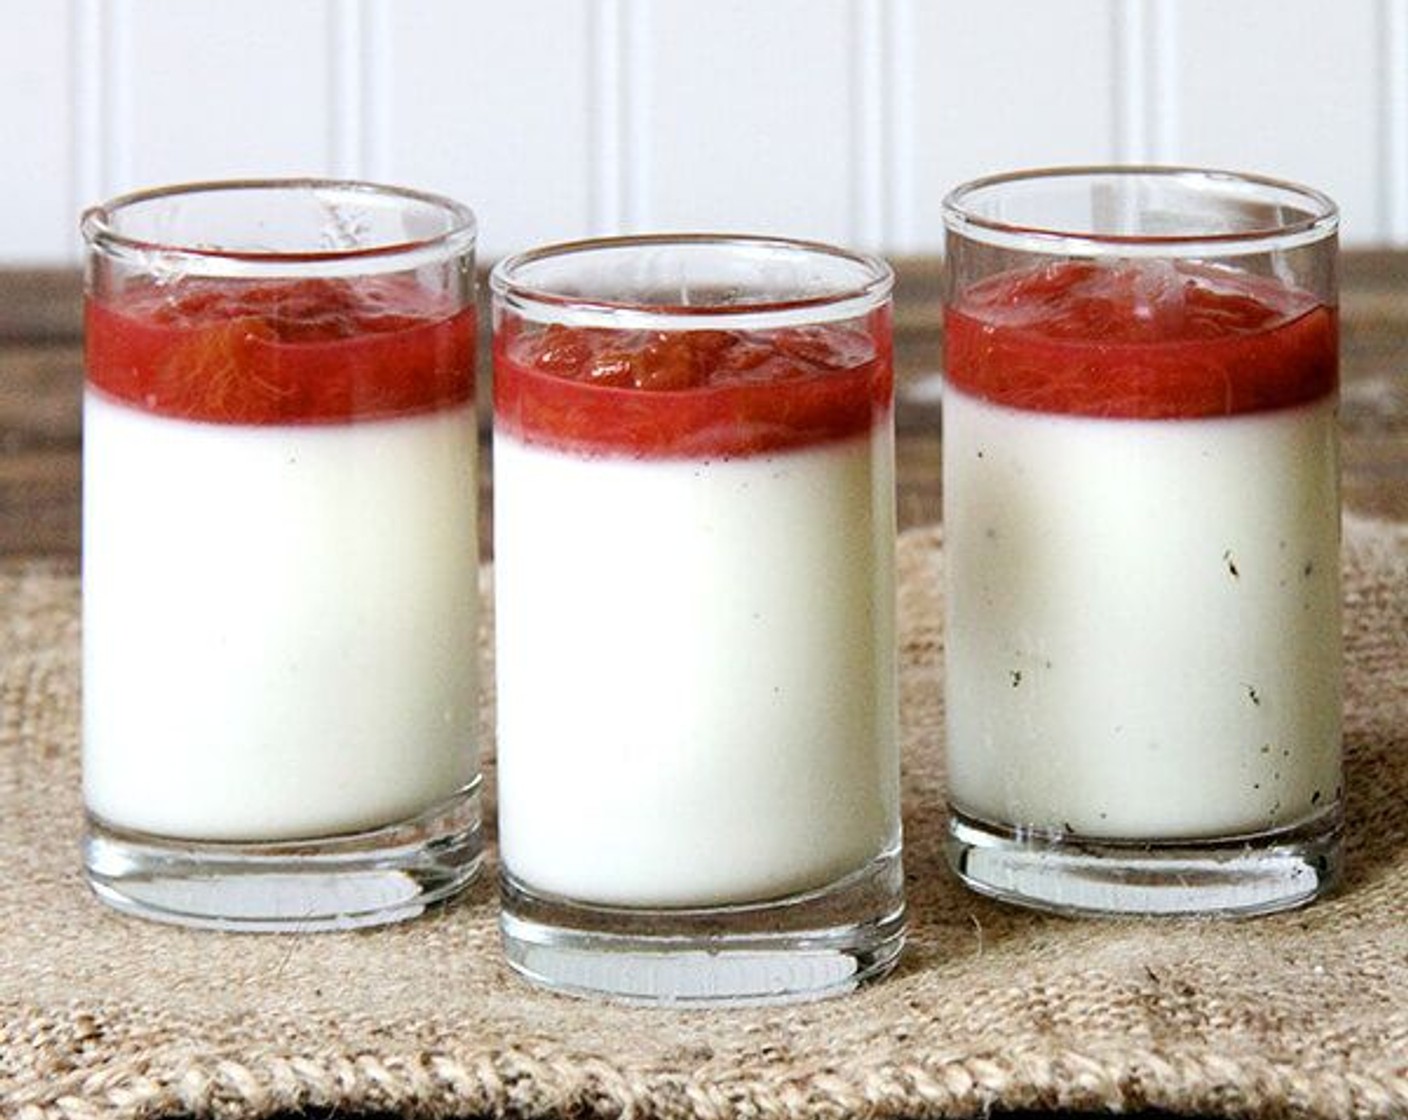 Buttermilk Panna Cotta with Rhubarb Compote